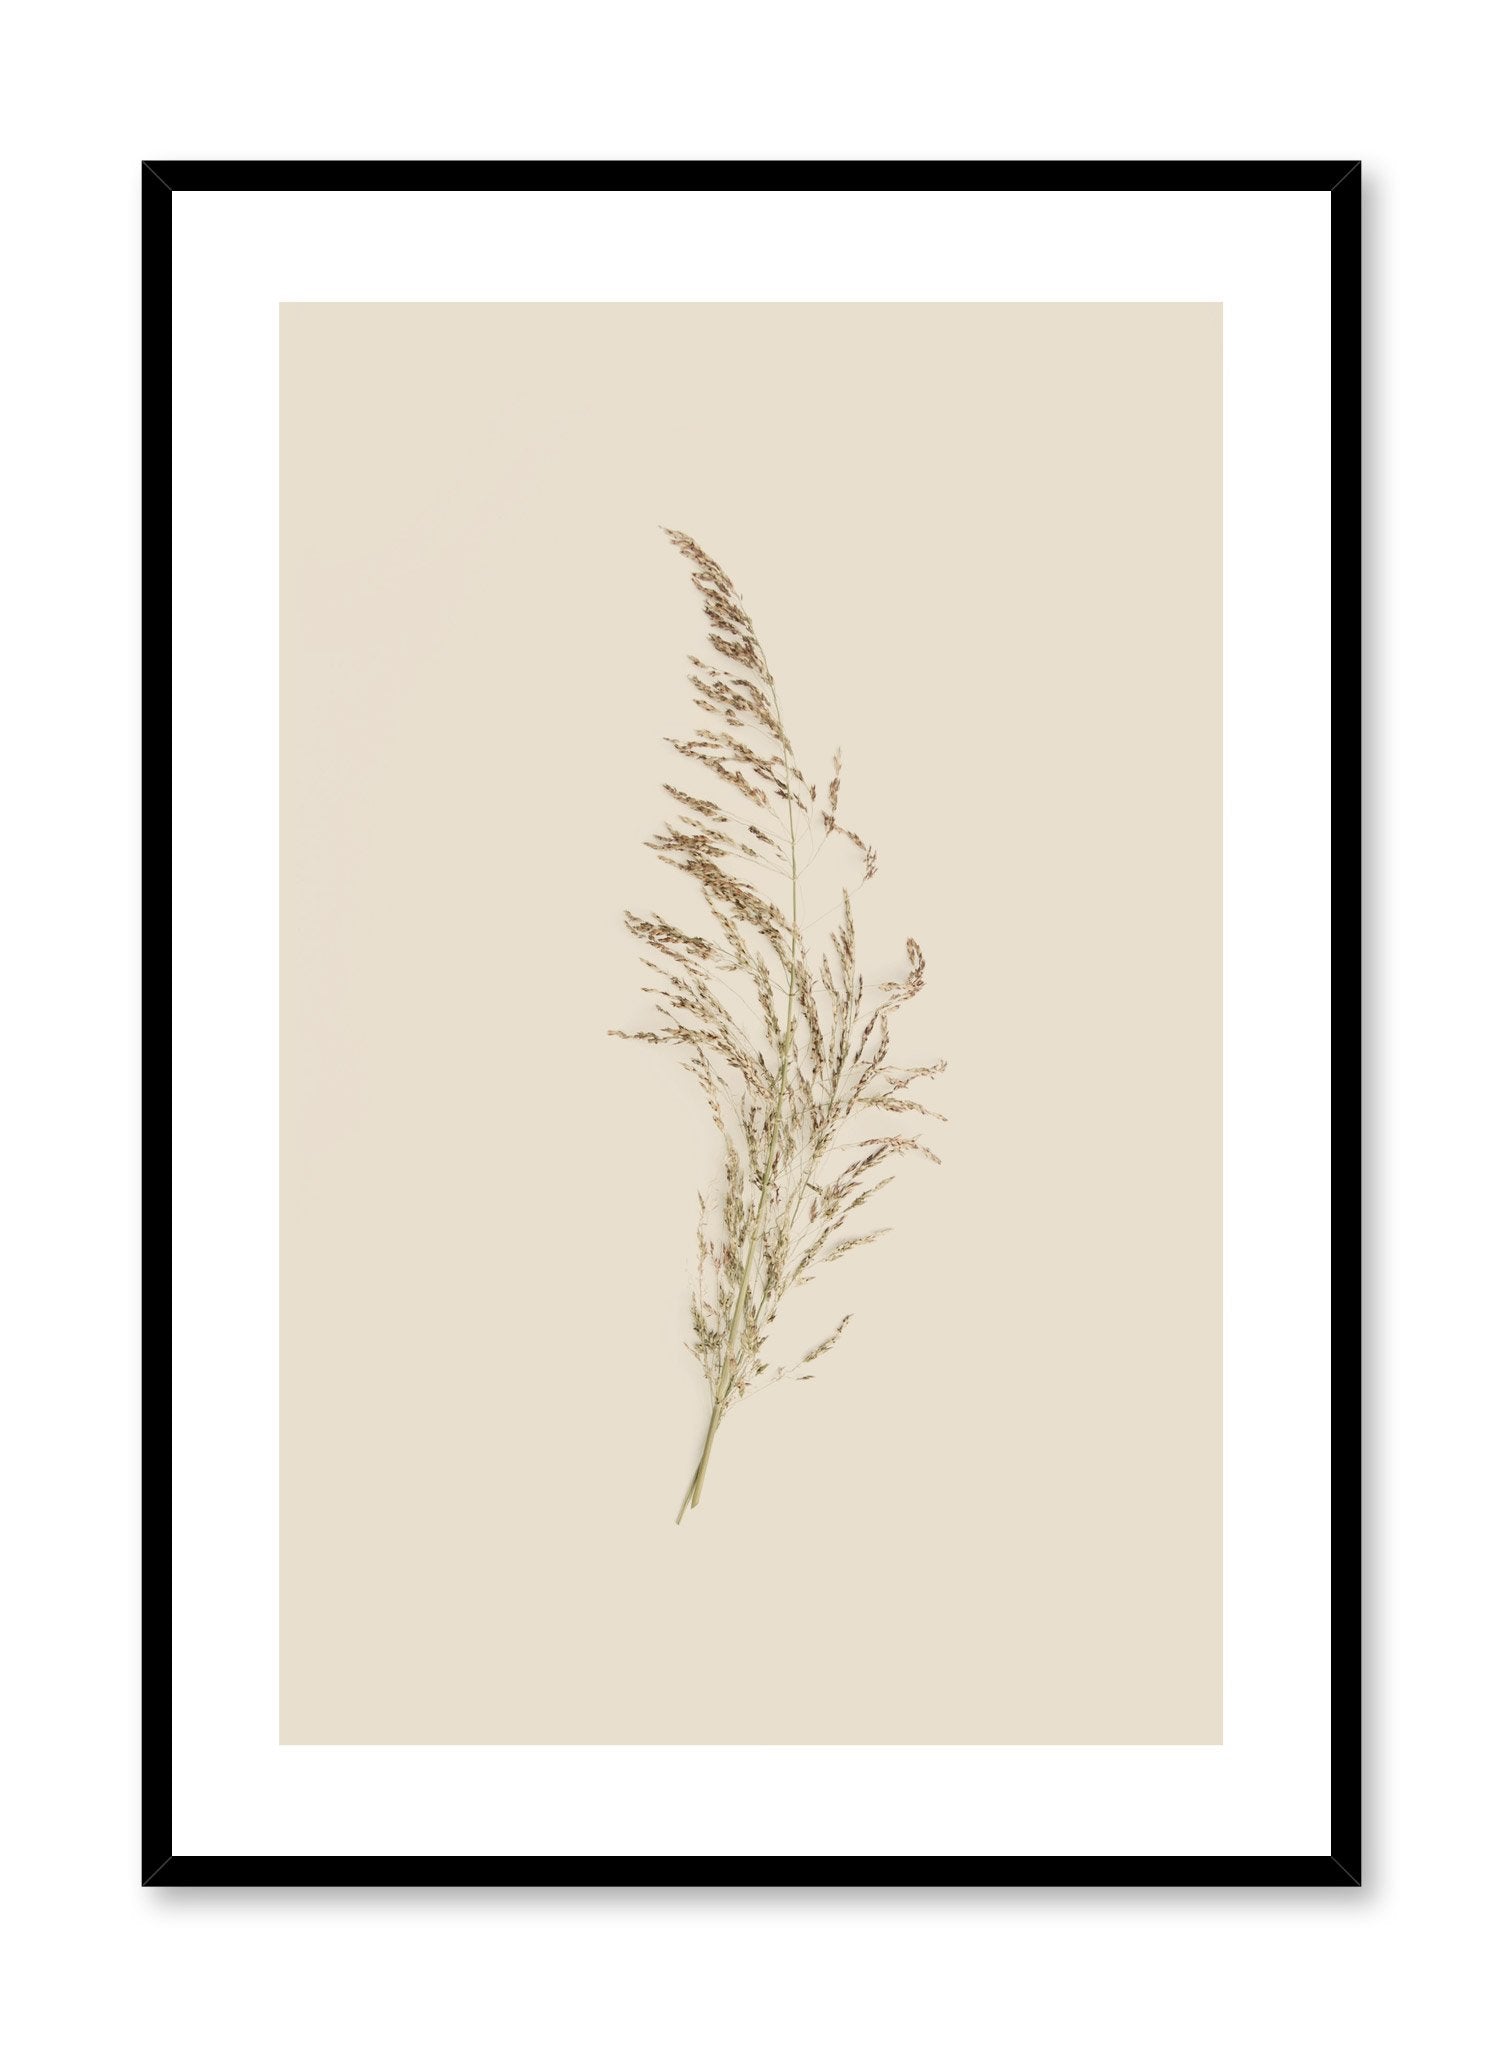 Modern minimalist botanical photography poster by Opposite Wall with single grass stem